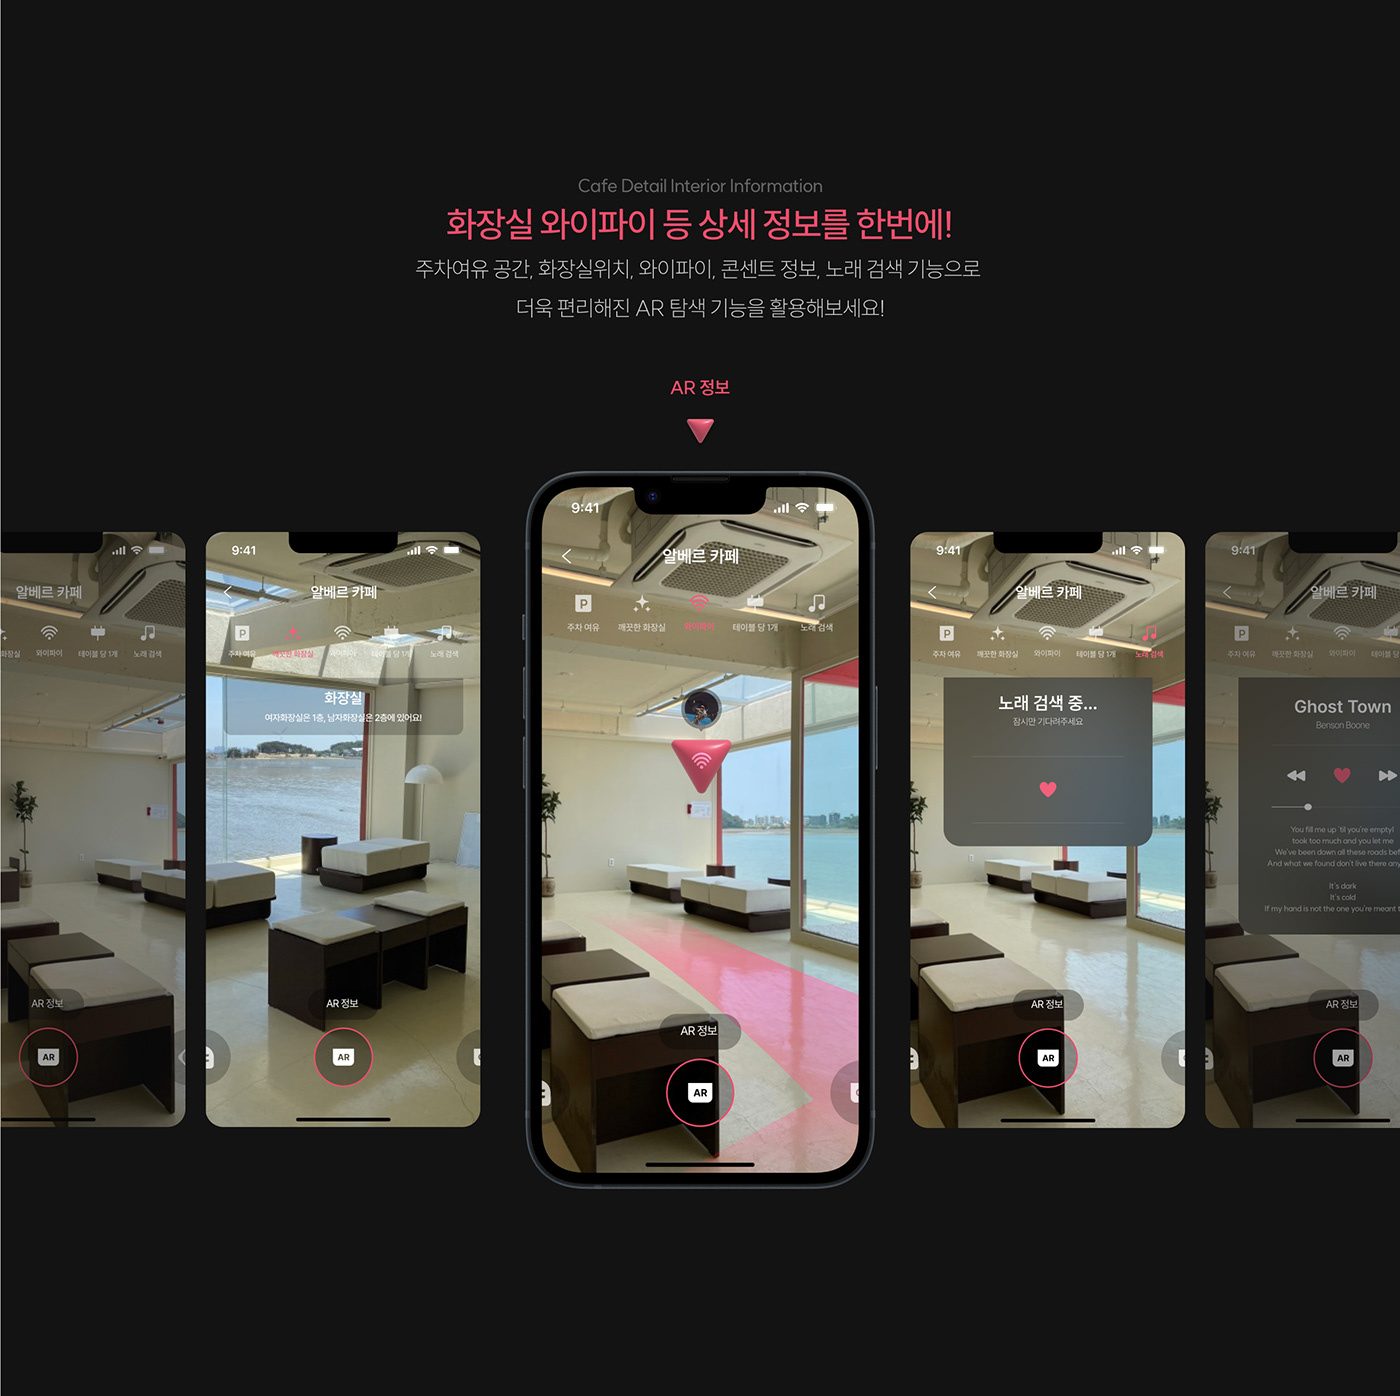 UI/UX #cafe  Mobile app Figma #10TH LAB VOID EXHIBITION #ar #AR Information #CAFERISM #pink #Search Service